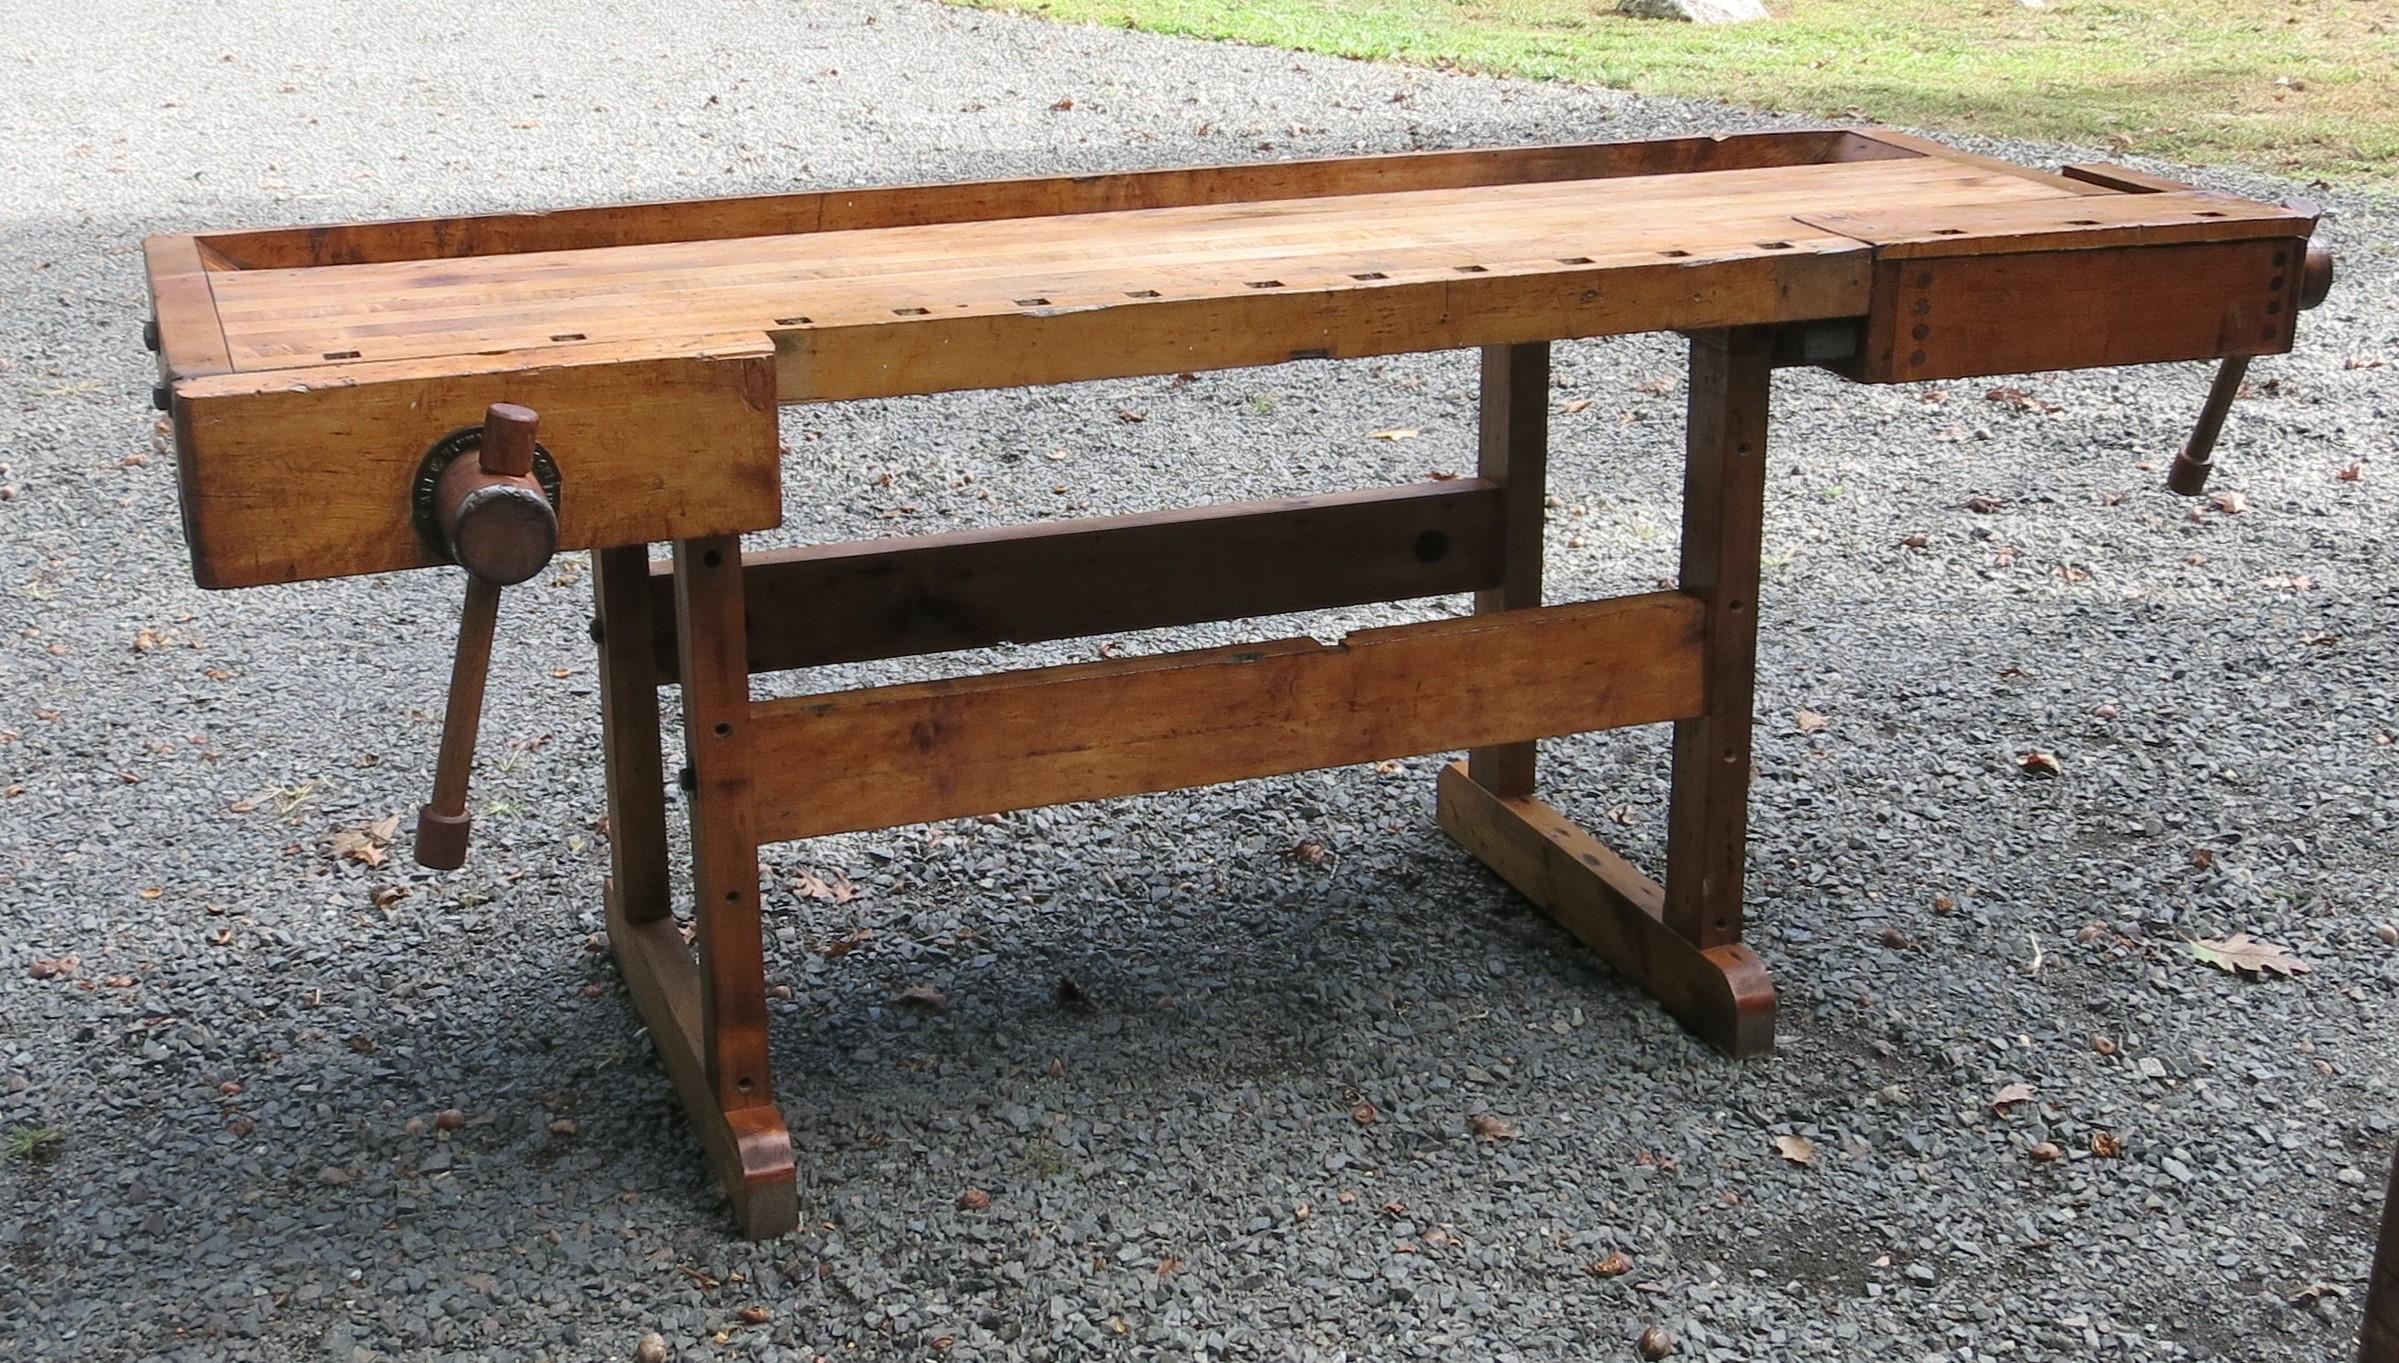 Antique carpenters workbench with nice patina. Measures: It is 24.25